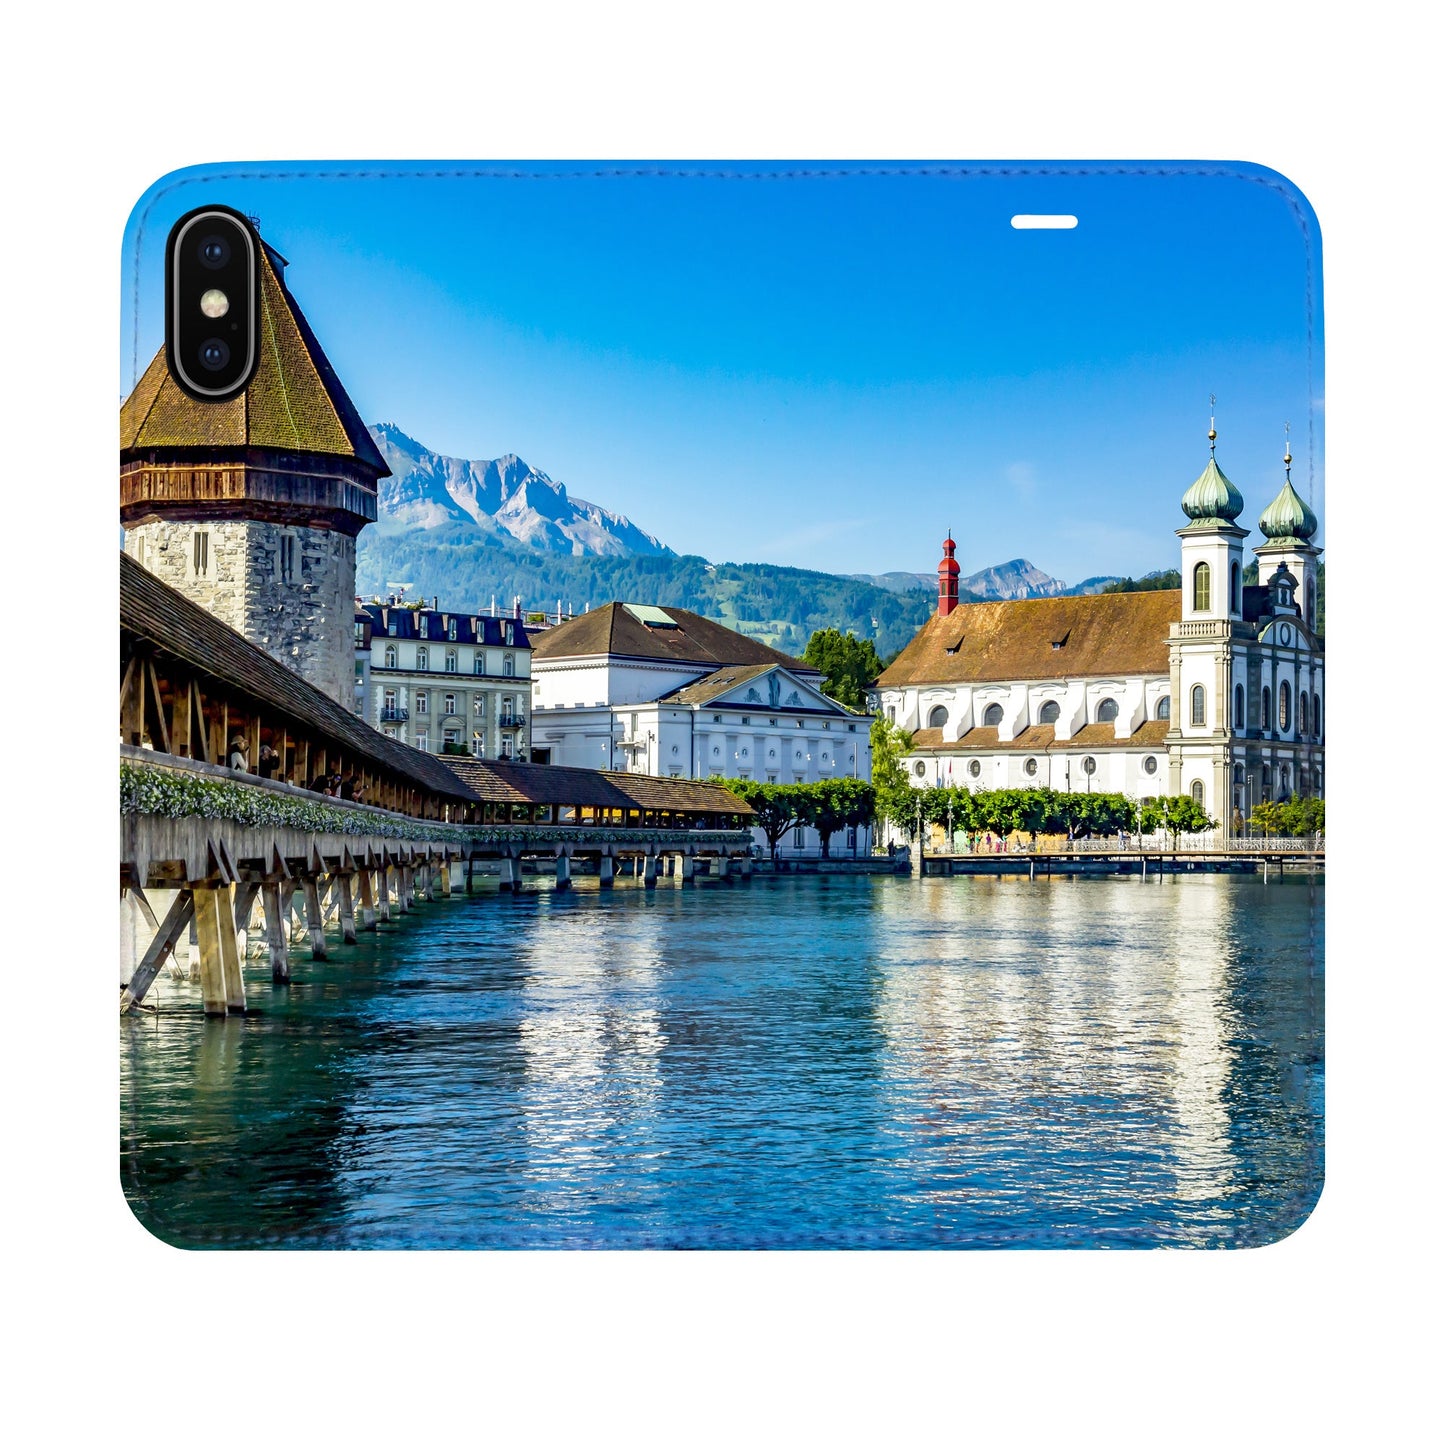 Lucerne City Panorama Case for iPhone XS Max